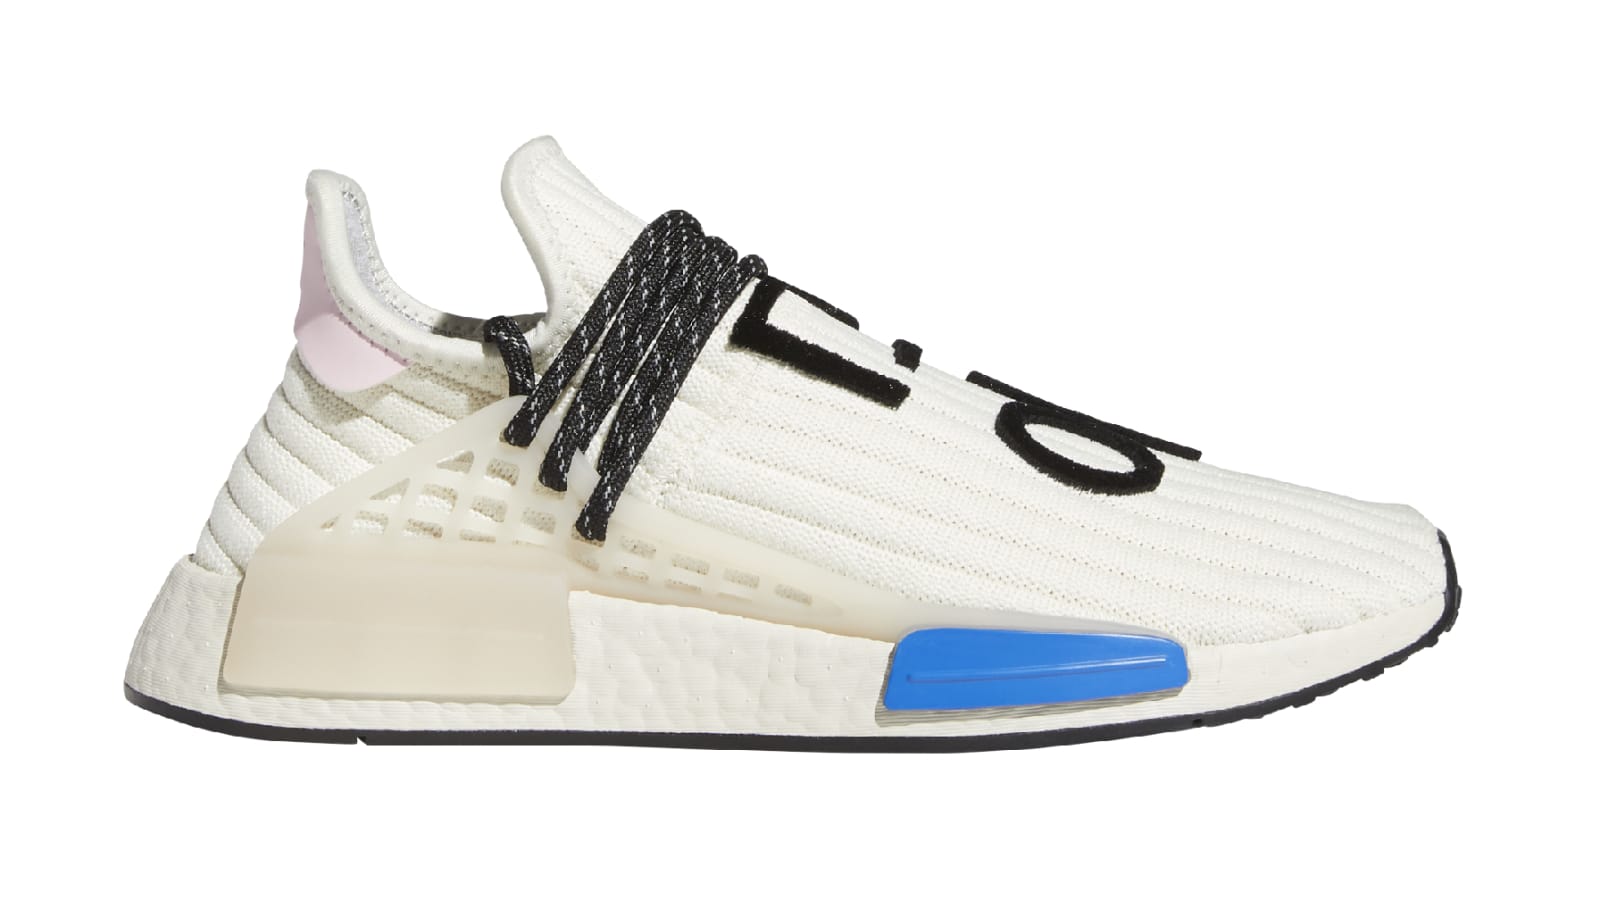 plads Sammenligning anmodning Pharrell x Adidas NMD Hu Set To Drop In Extremely Limited Colorway